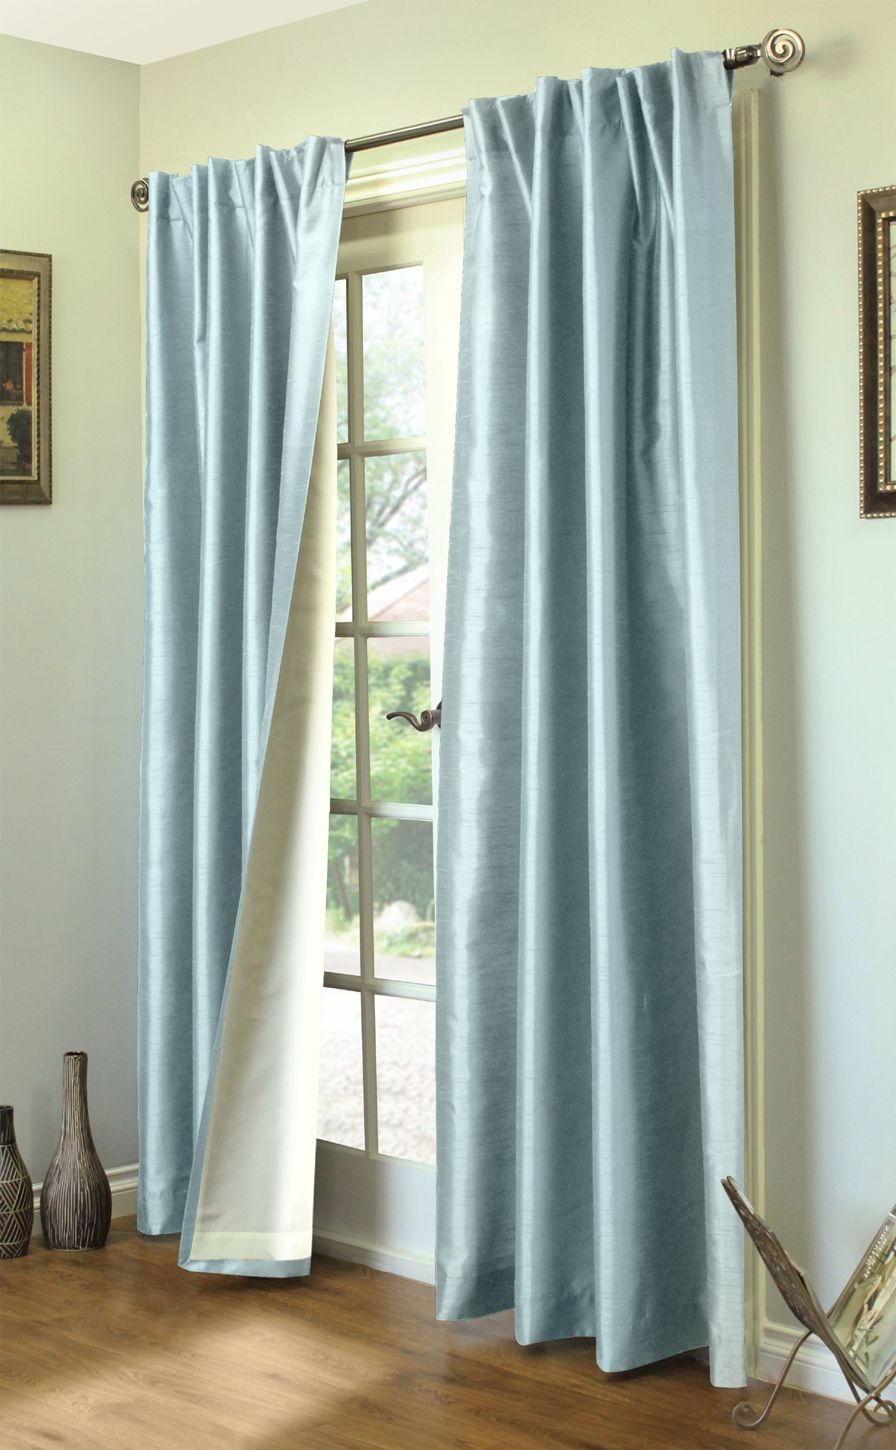 Rod Pocket Curtains Thecurtainshop Throughout 54 Inch Long Curtain Panels (View 5 of 25)